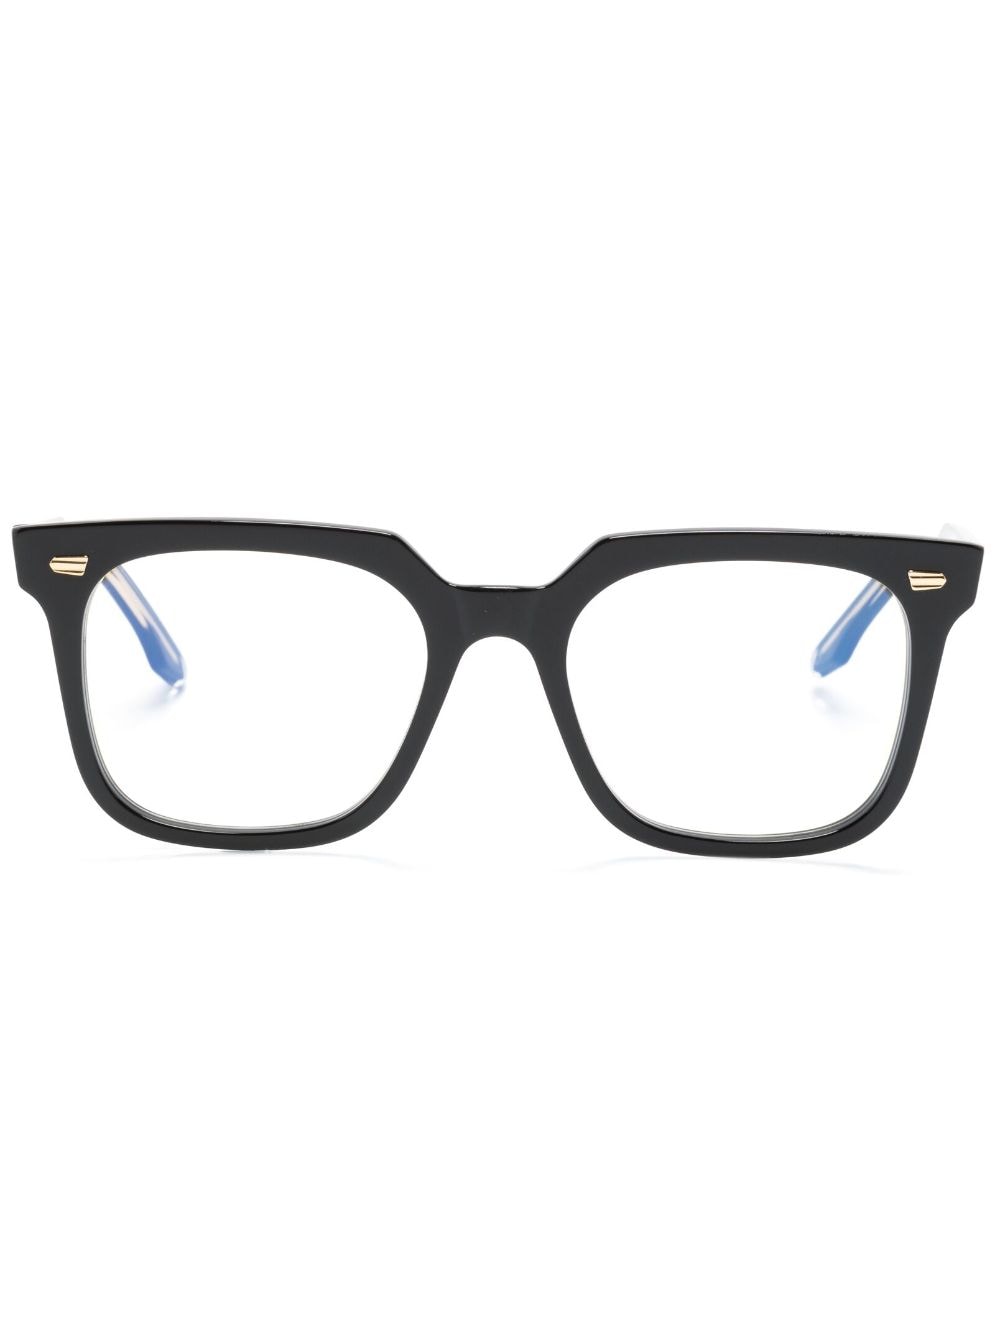 Cutler And Gross Square-frame Glasses In Black